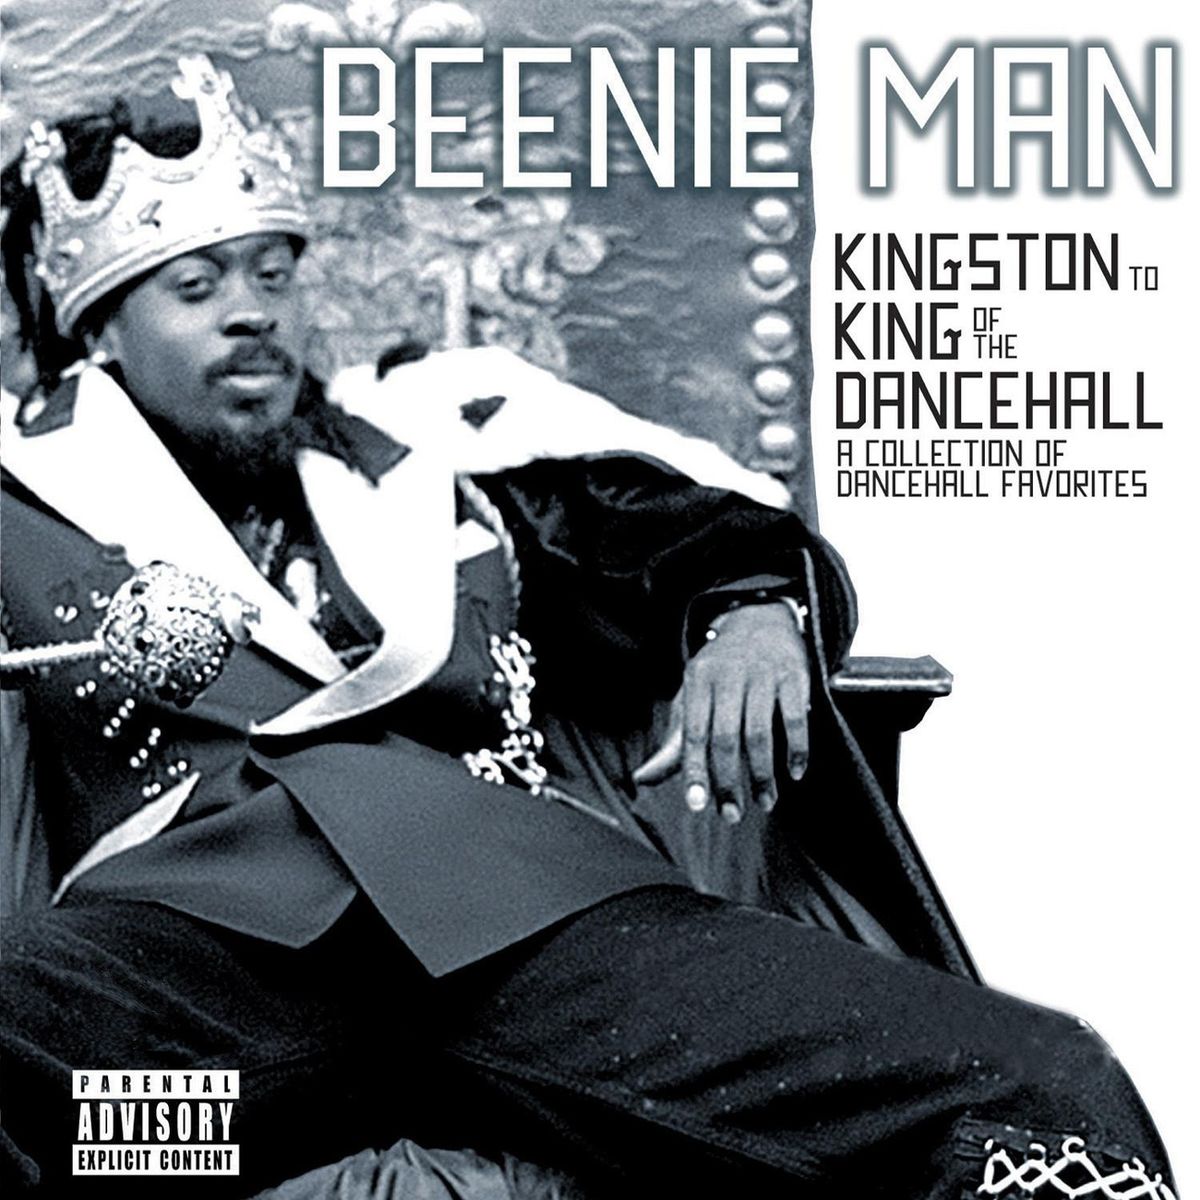 16 - Beenie Man - The Specialists.mp3